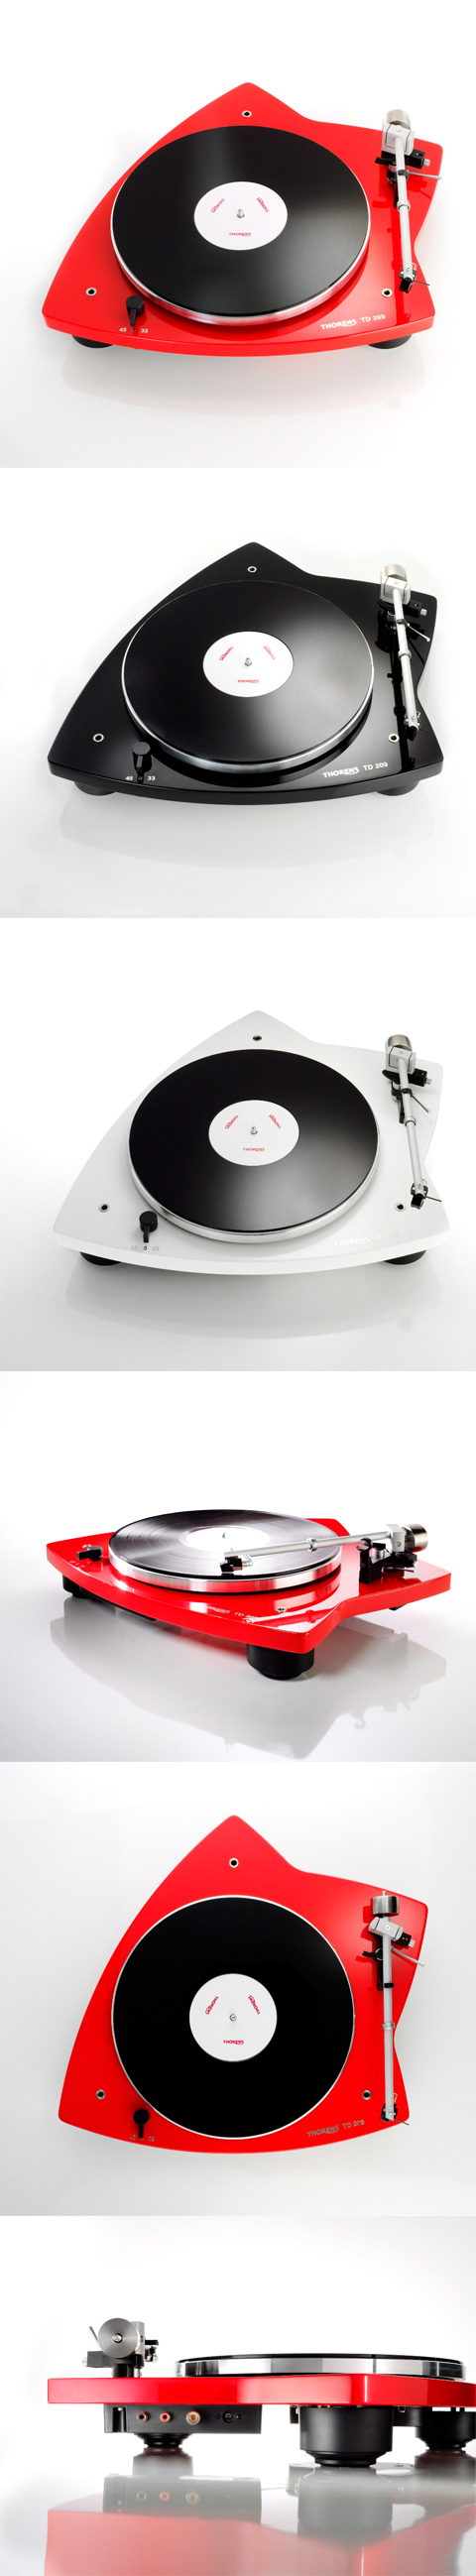   : Thorens TD 209 (Made in Germany) High gloss Red